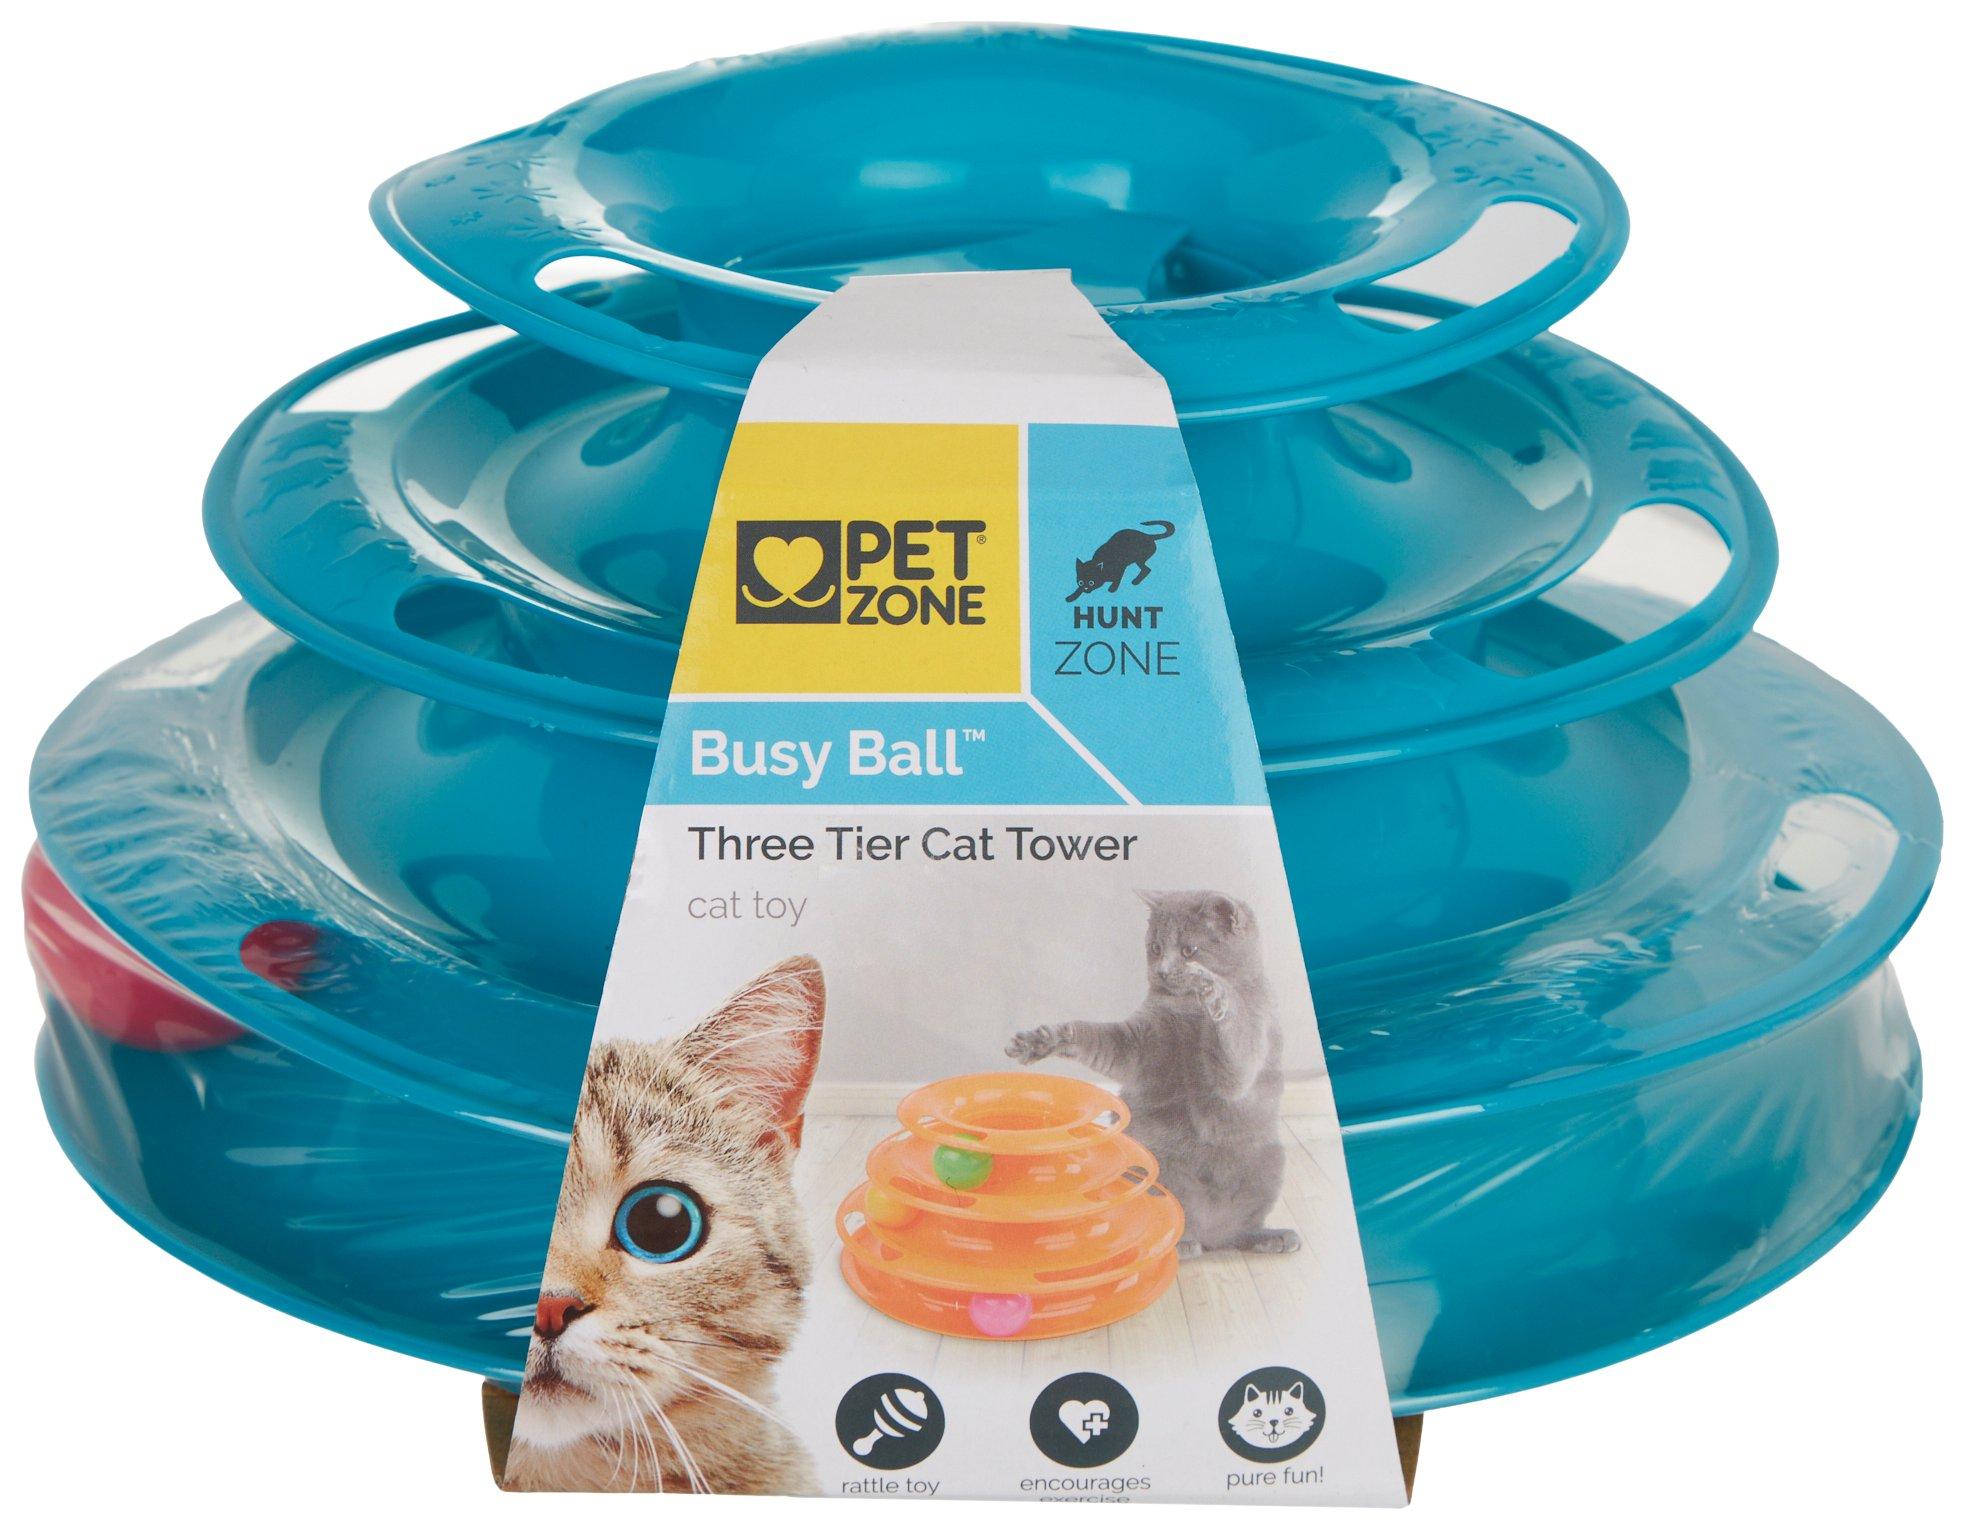 Busy Ball 3 Tier Cat Tower Cat Toy